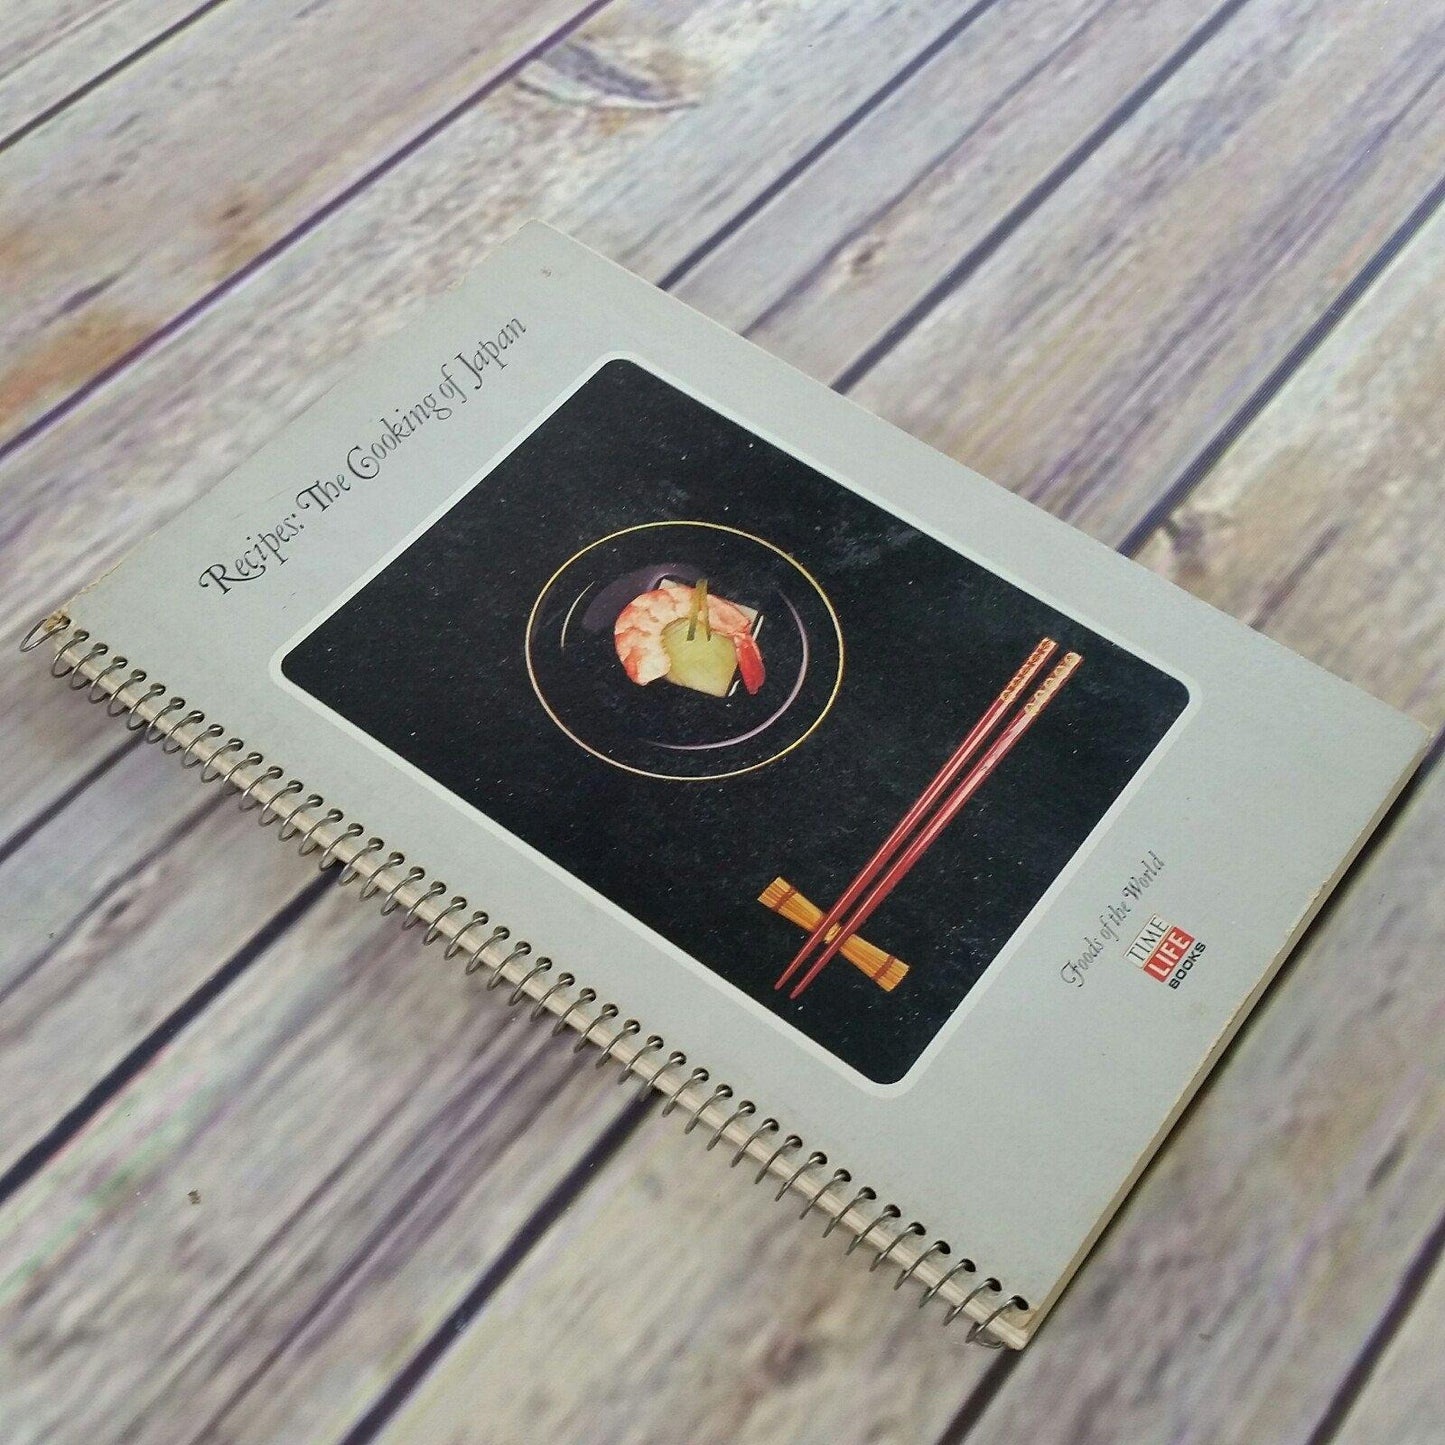 Vintage Cookbook Japanese Cooking Recipes Time Life Books Foods of the World 1968 Spiral Bound The Cooking of Japan